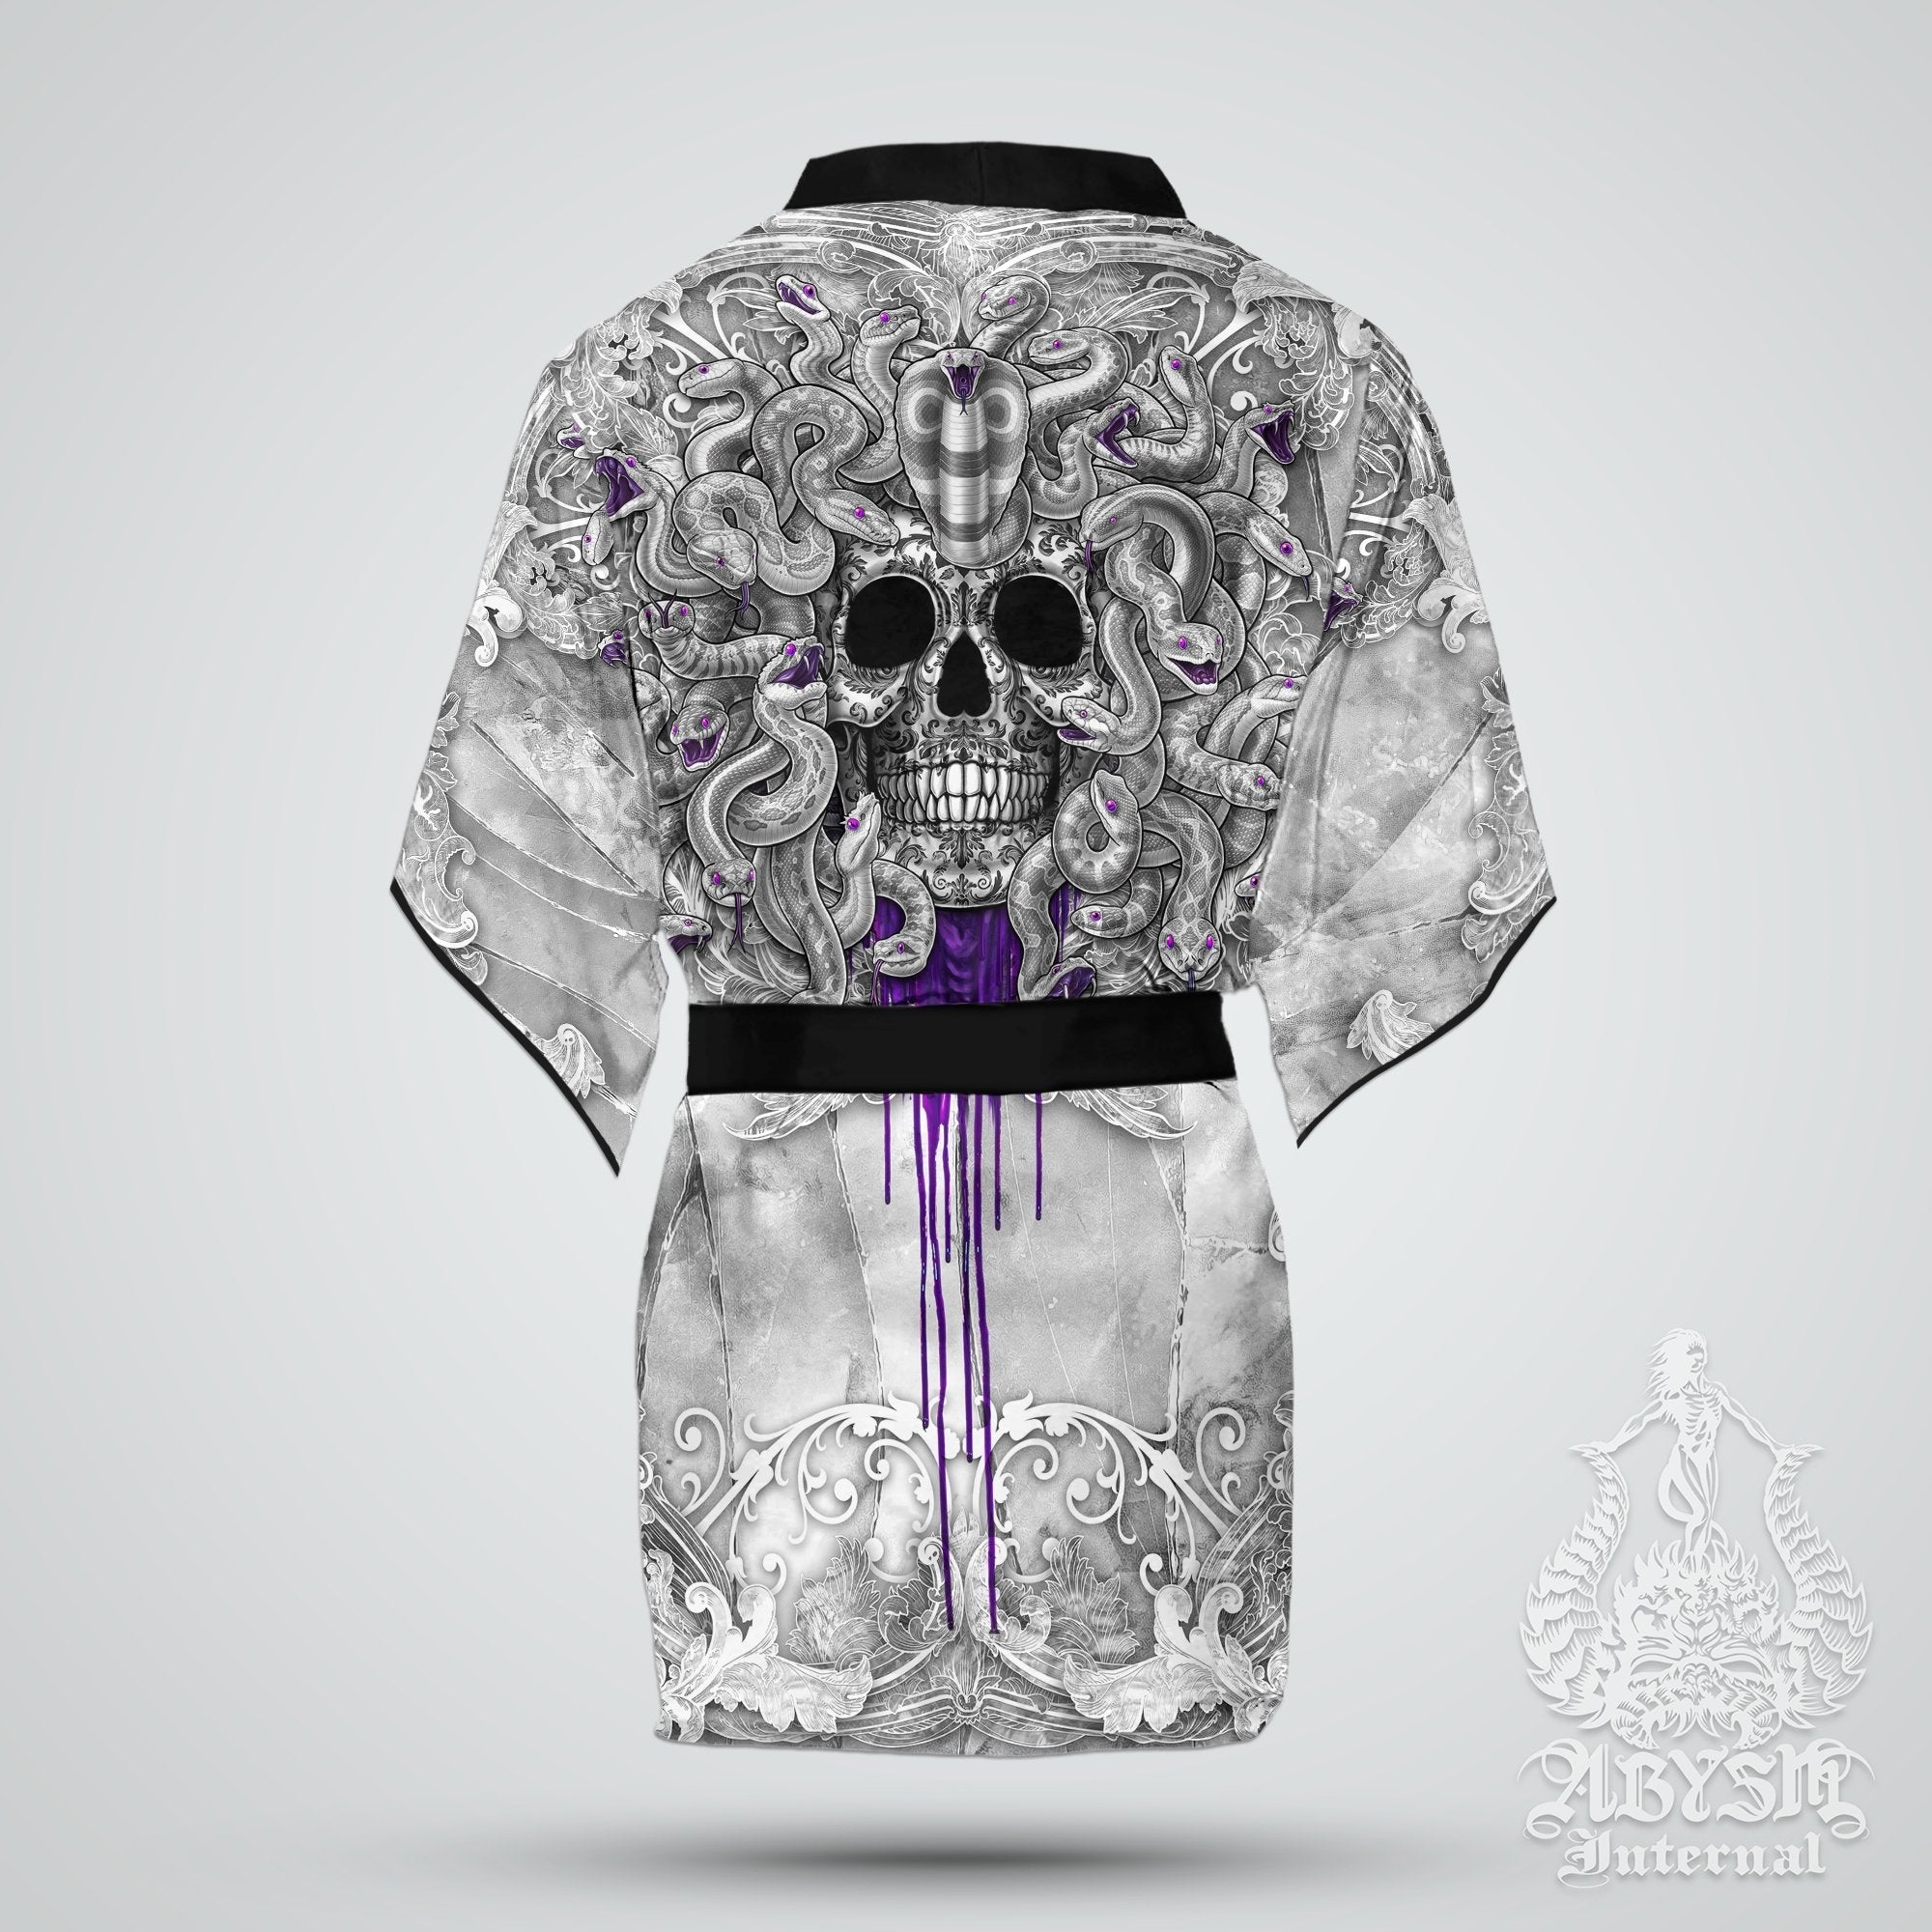 Medusa Skull Cover Up, Beach Outfit, Party Kimono, Summer Festival Robe, Indie and Alternative Clothing, Unisex - White Goth Purple - Abysm Internal